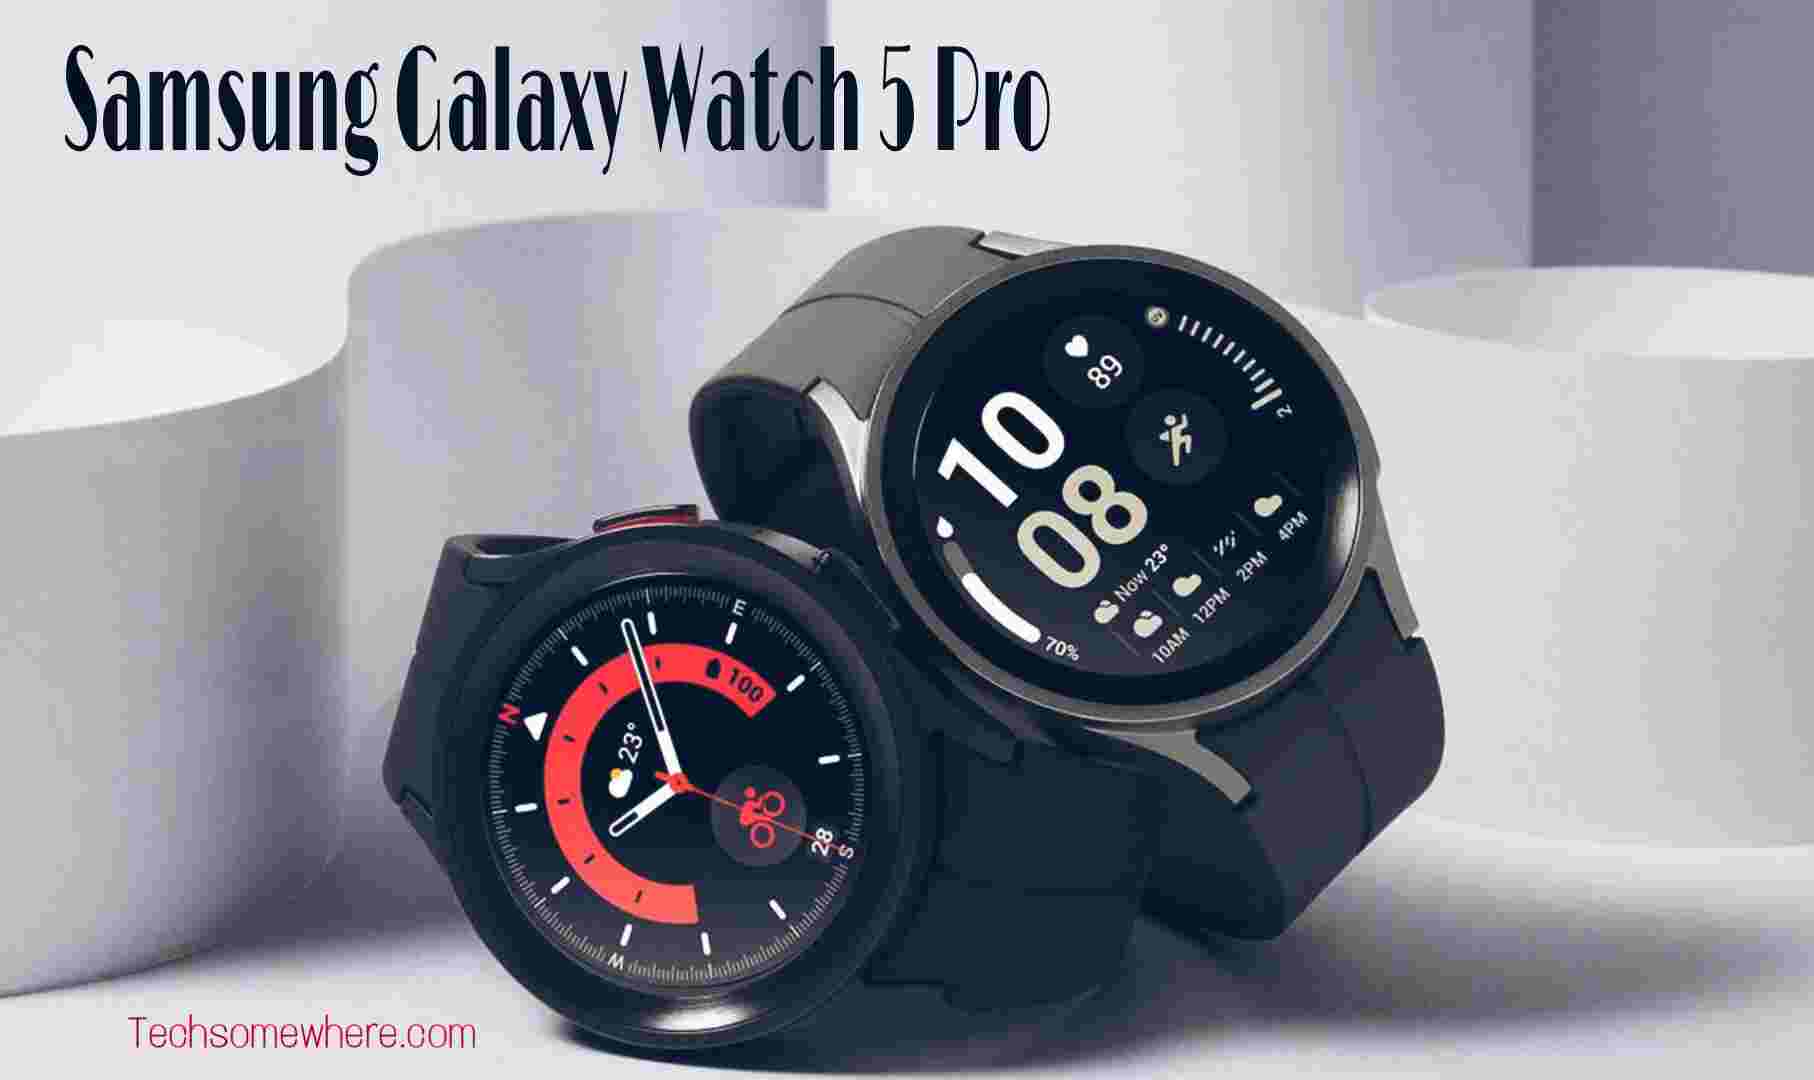 Samsung Recently Announced Galaxy Watch5 Pro. Lets see Galaxy Watch 5 Pro Specs, Price & Release Date!